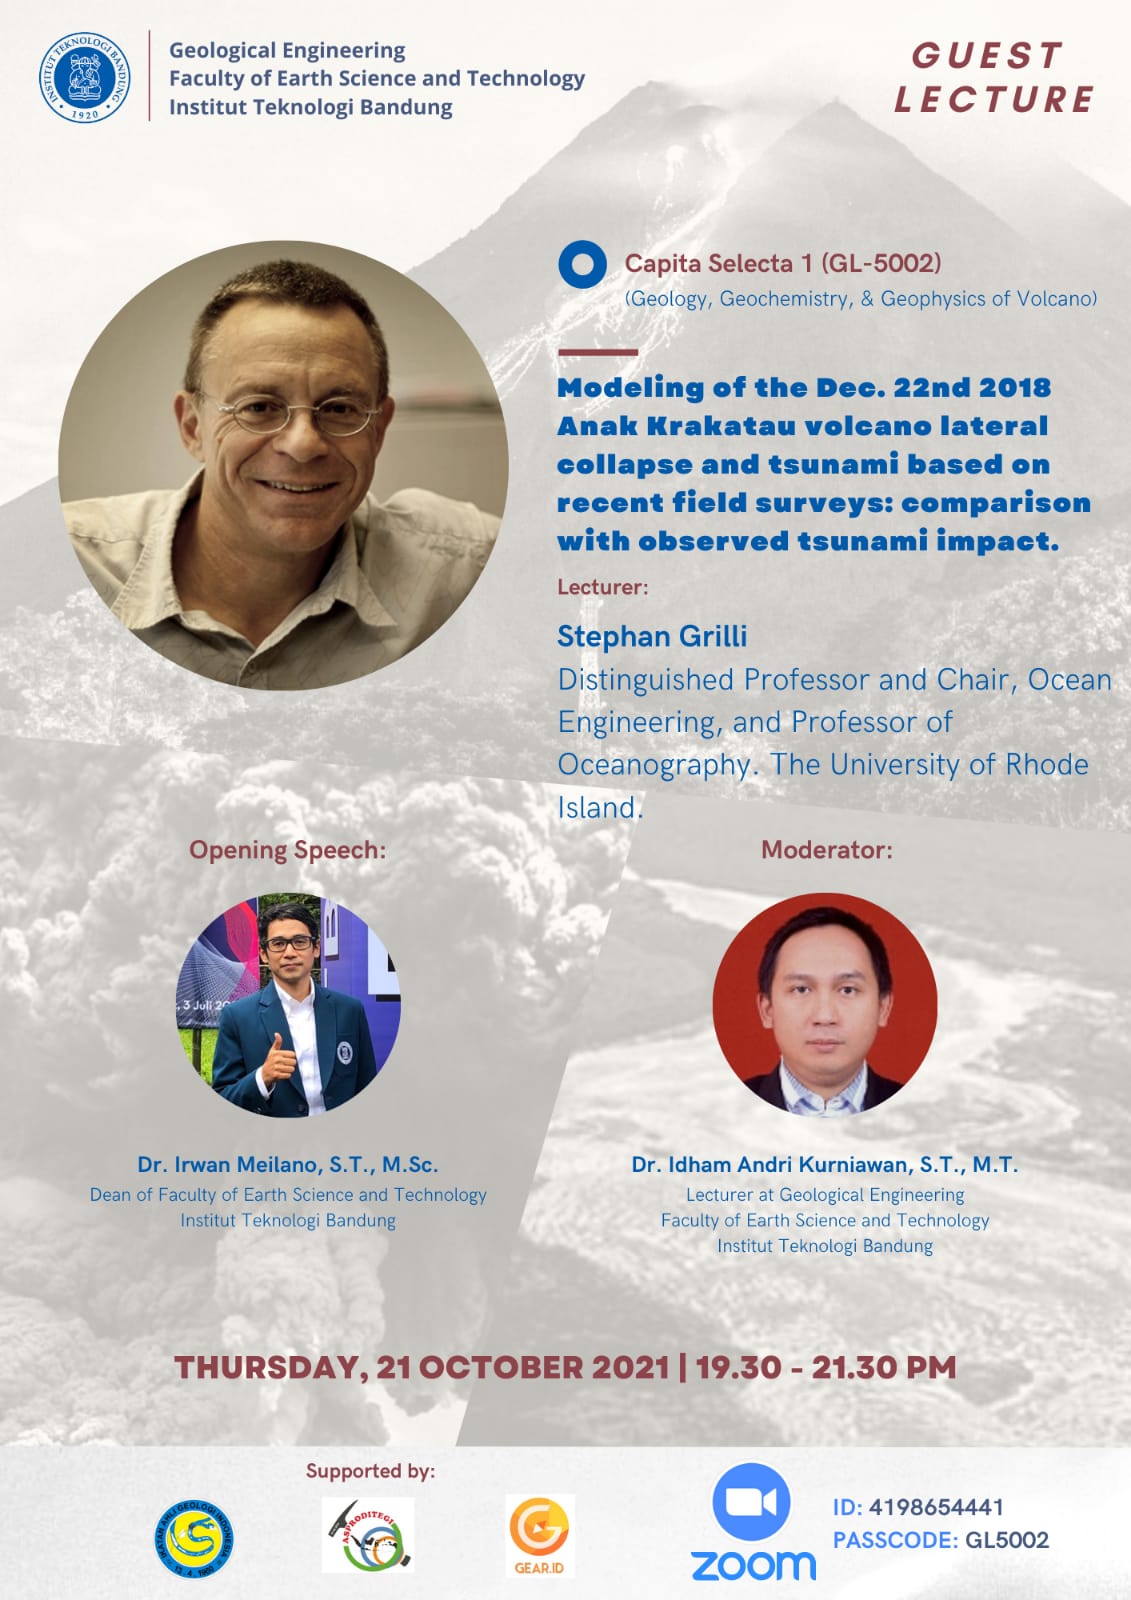 Lecturer: Stephan Grilli (Distinguished Professor and Chair, Ocean Engineering, and Professor of Oceanography. The University of Rhode Island) Topic: Modeling of the Dec. 22nd 2018 Anak Krakatau volcano lateral collapse and tsunami based on recent field surveys: comparison with observed tsunami impact.